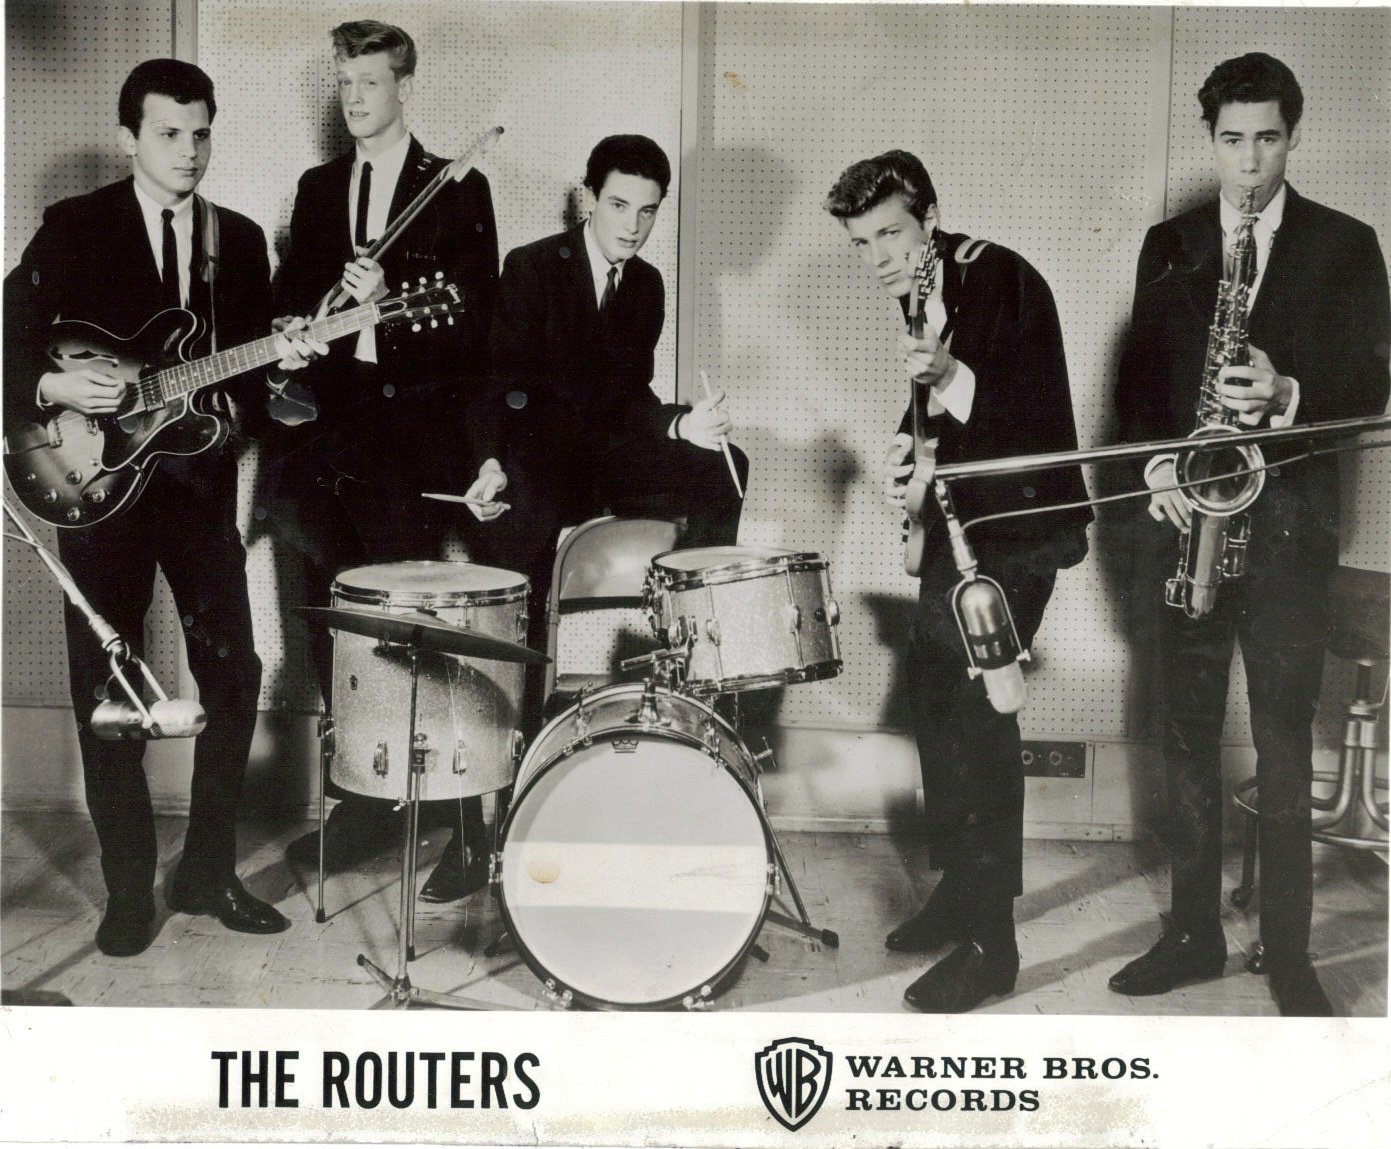 Randy Viers on drums, Michael Gordon, leader of The Routers, on guitar (far left).